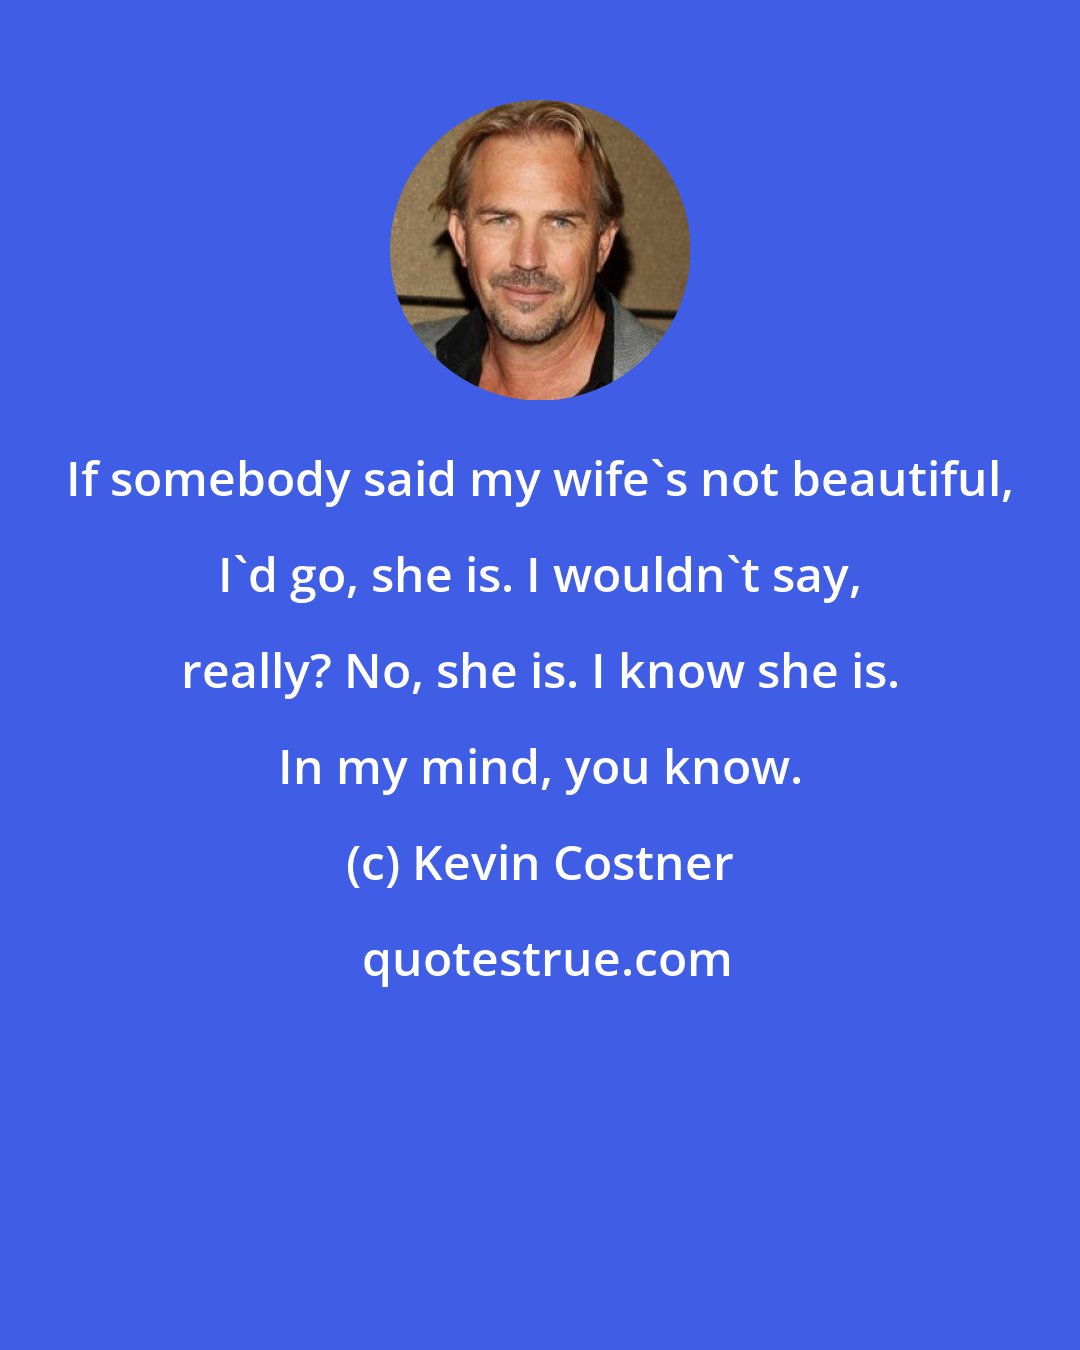 Kevin Costner: If somebody said my wife's not beautiful, I'd go, she is. I wouldn't say, really? No, she is. I know she is. In my mind, you know.